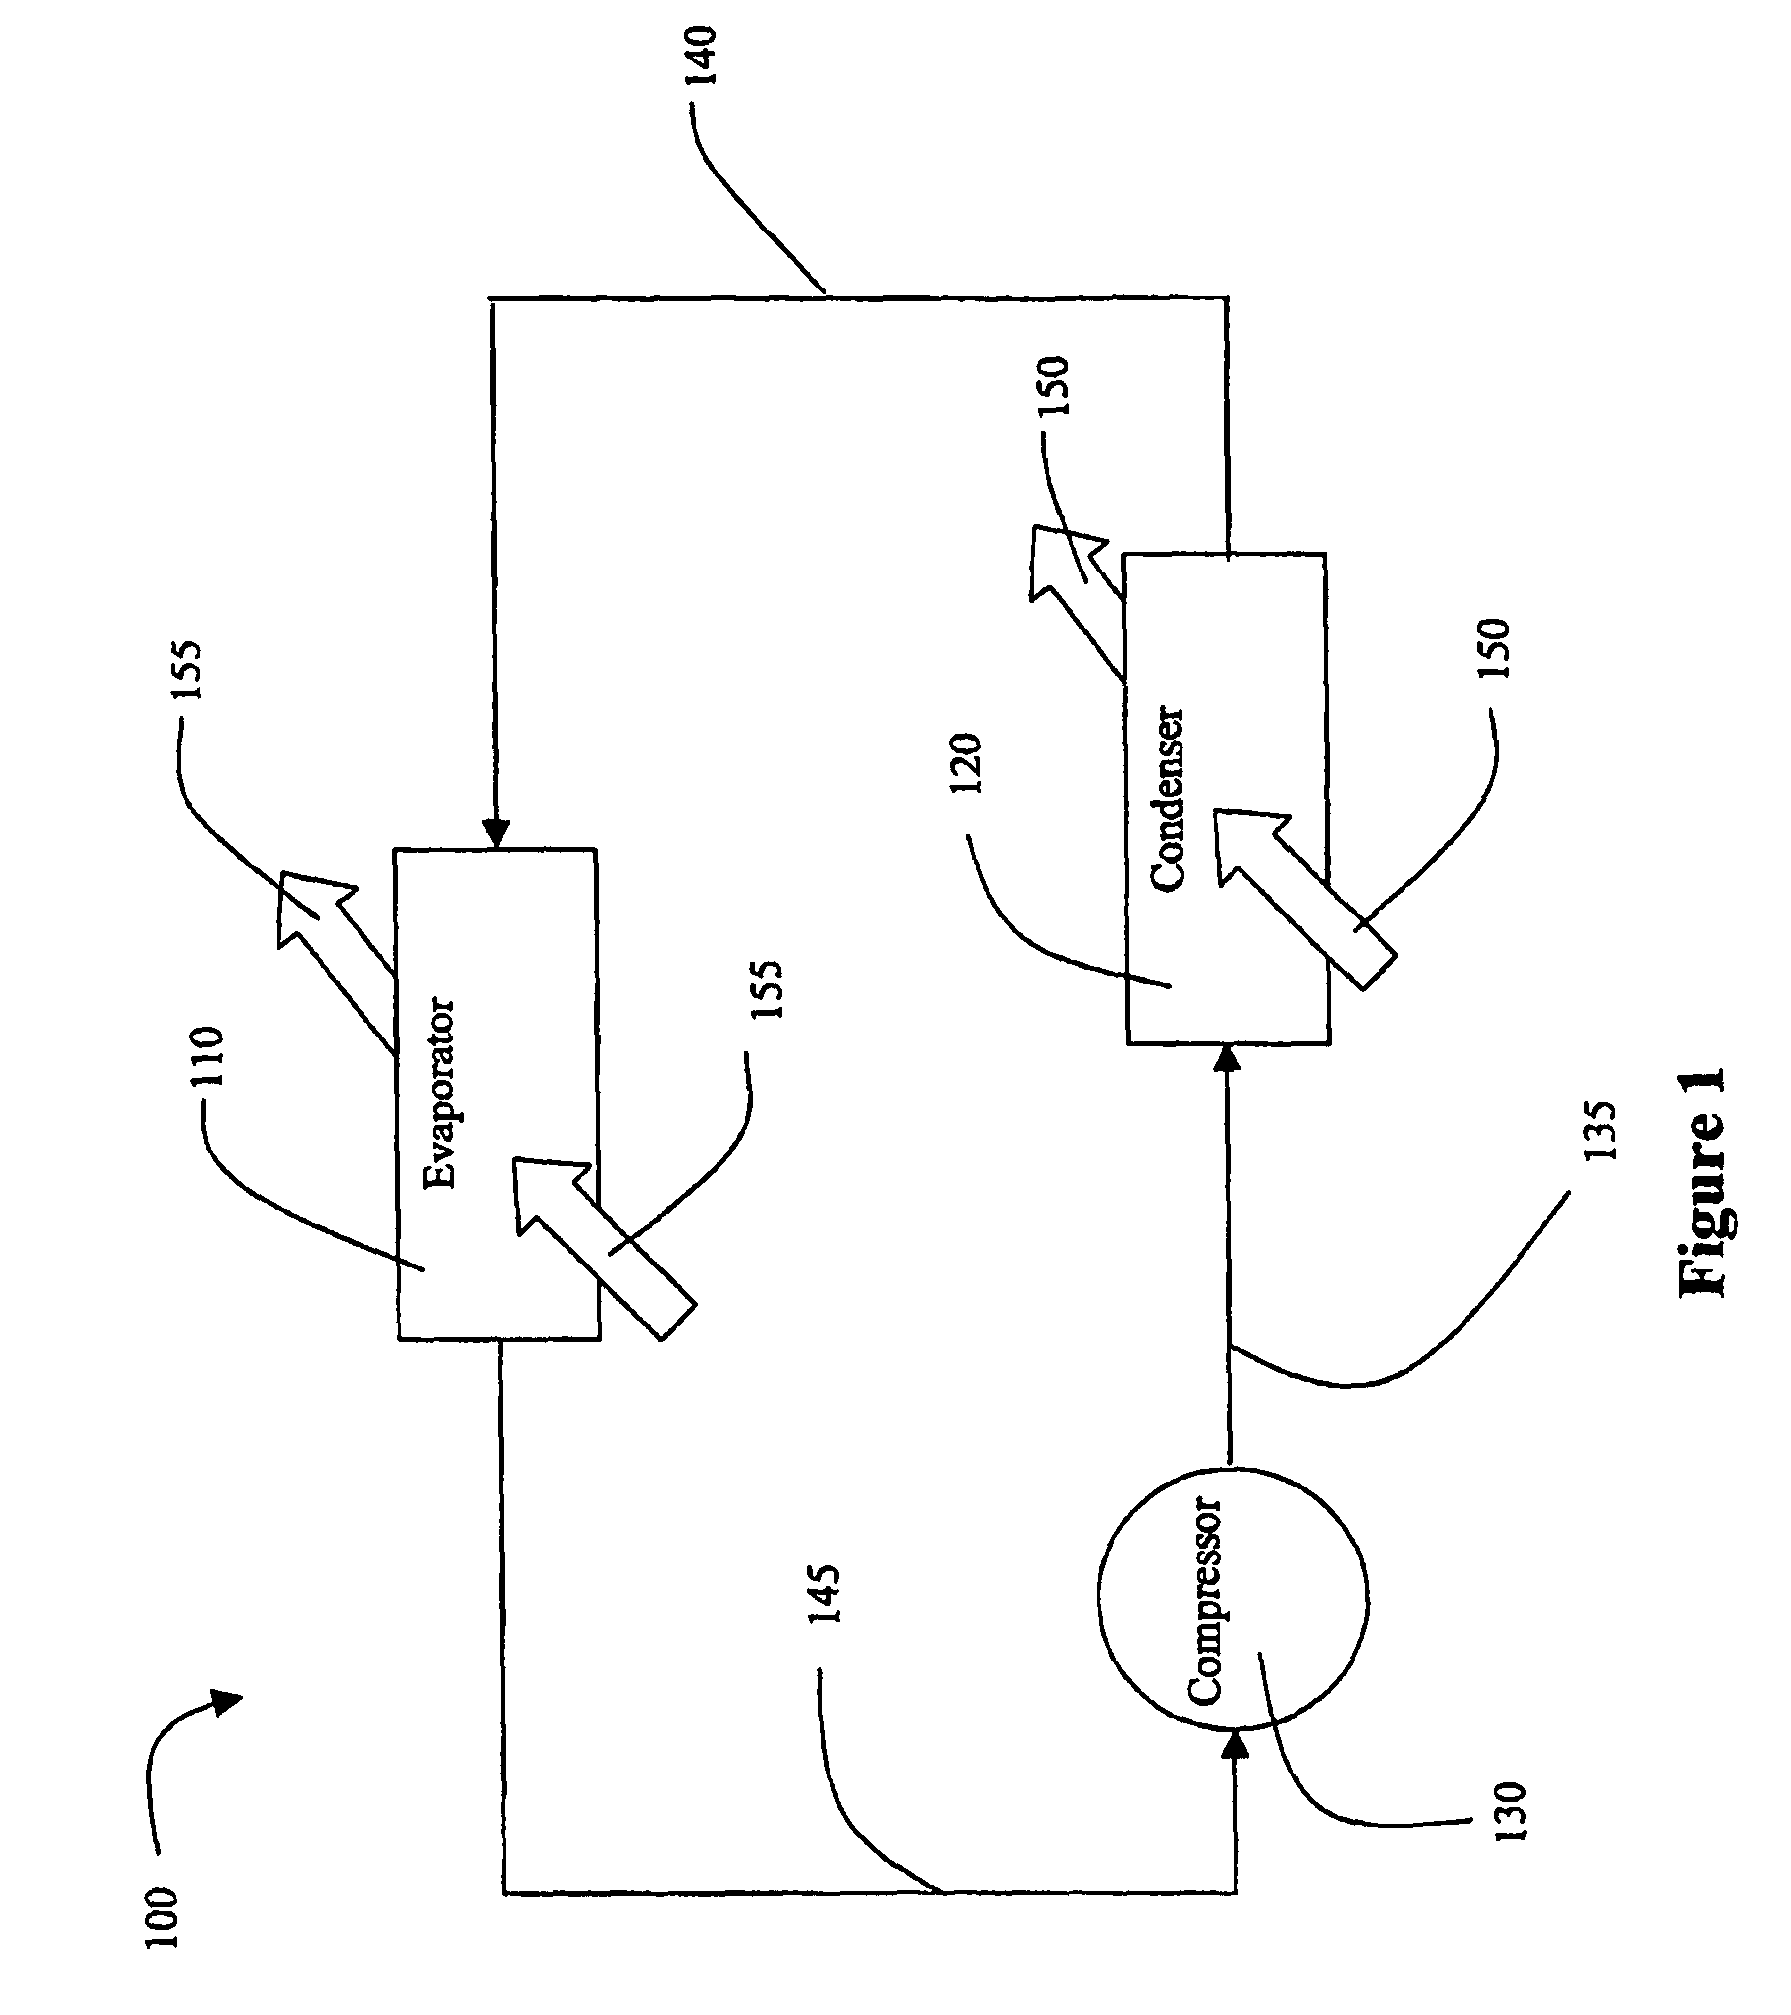 Method and apparatus to sense and establish operation mode for an HVAC control